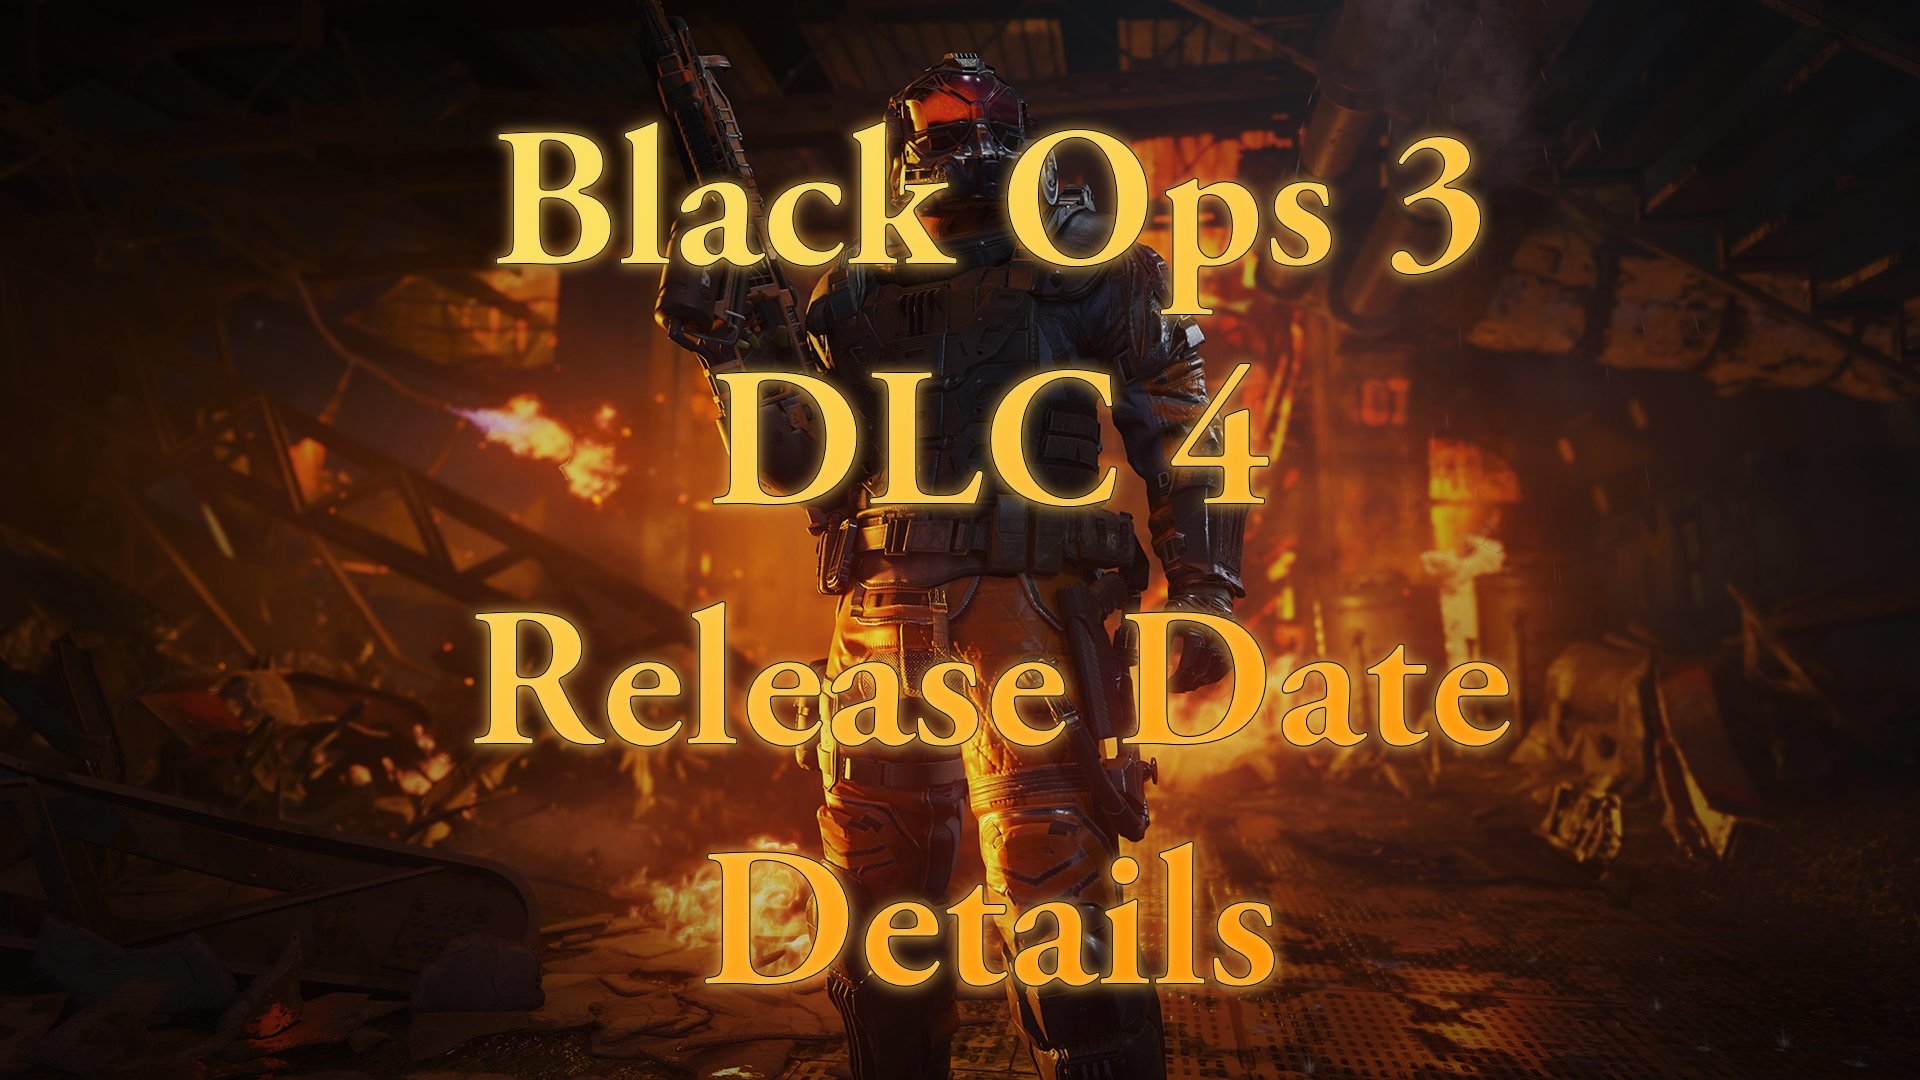 What you need to know about the Black Ops 3 DLC 4 release date, maps and Zombies.